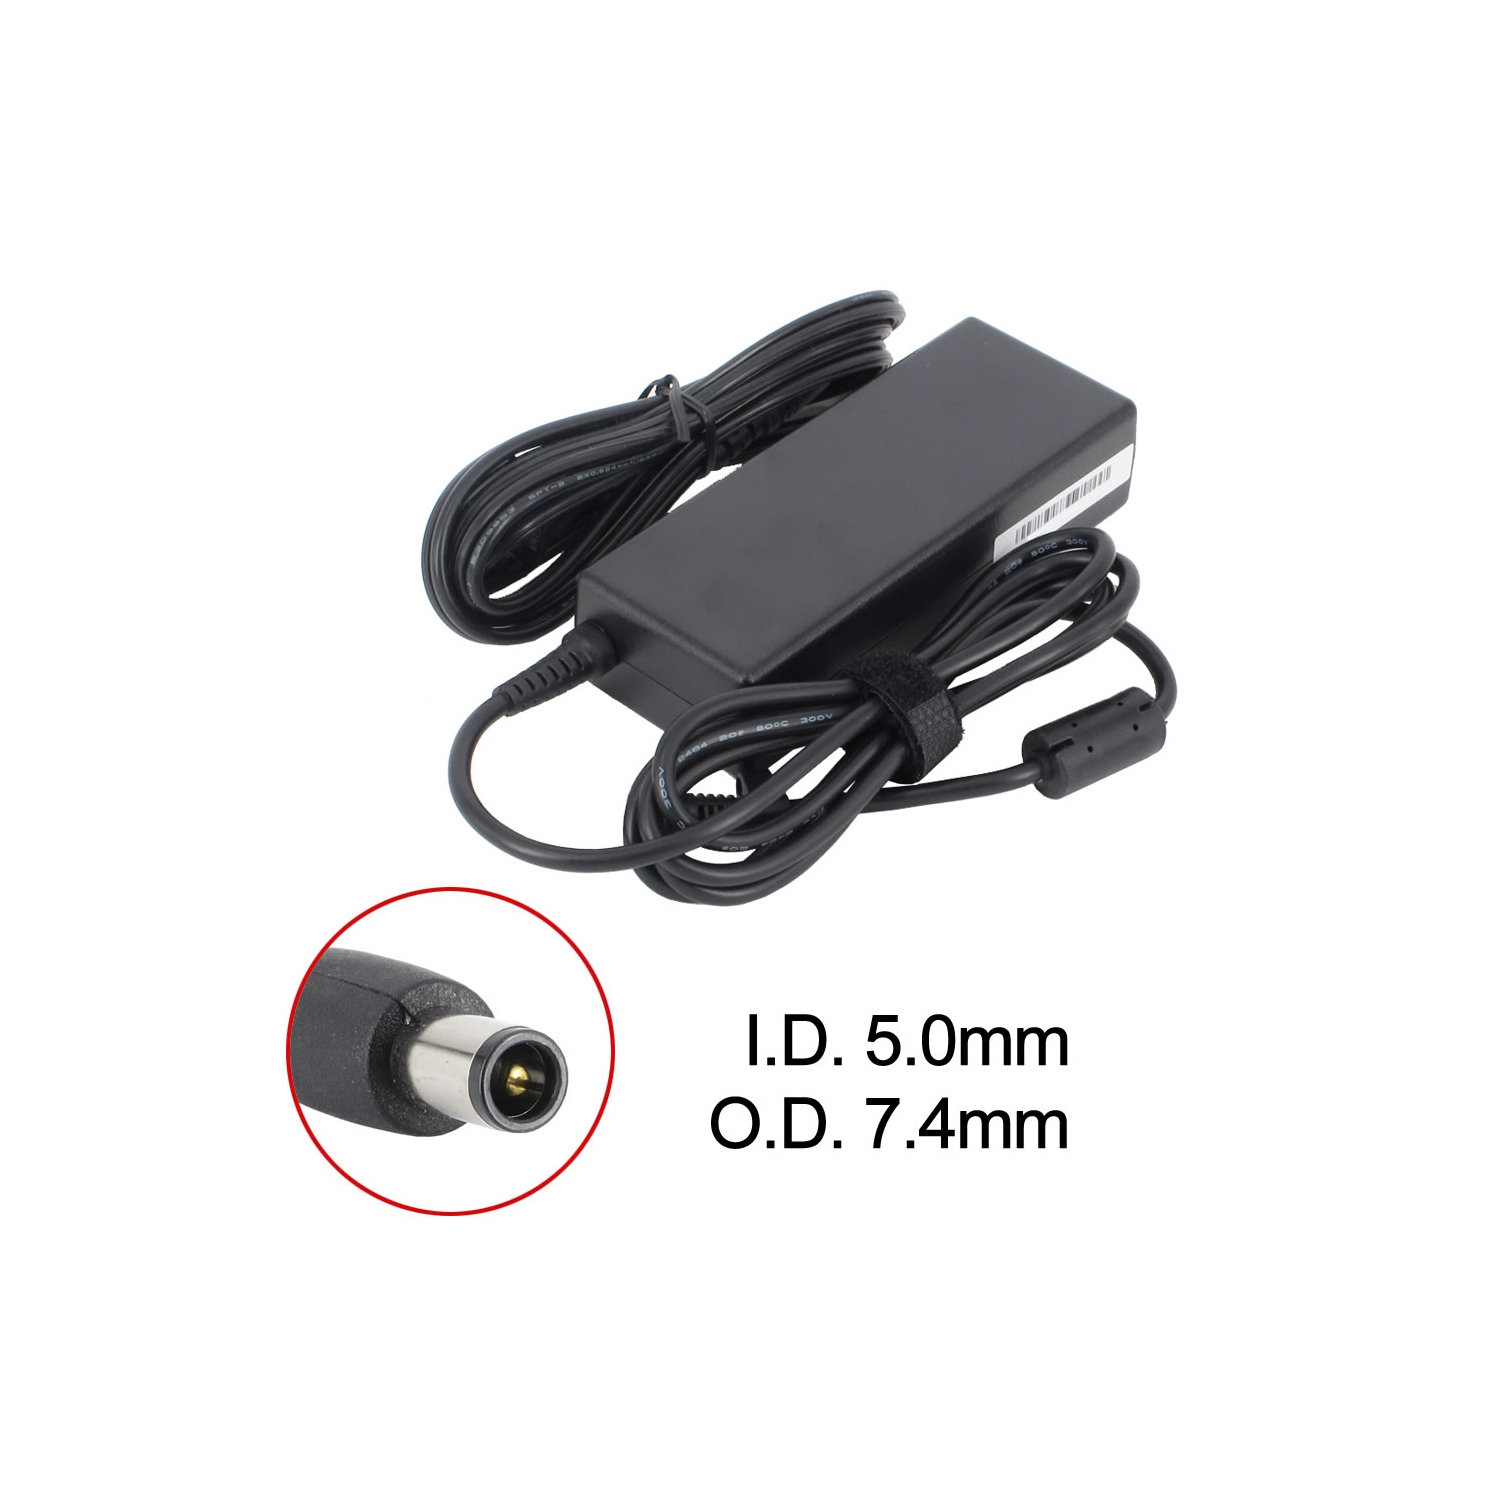 New Laptop AC Adapter for HP Pavilion g6-1D20, 409515-001, 463553-004, 609939-001, HP-OK065B133SELF, PA-1900-32HE